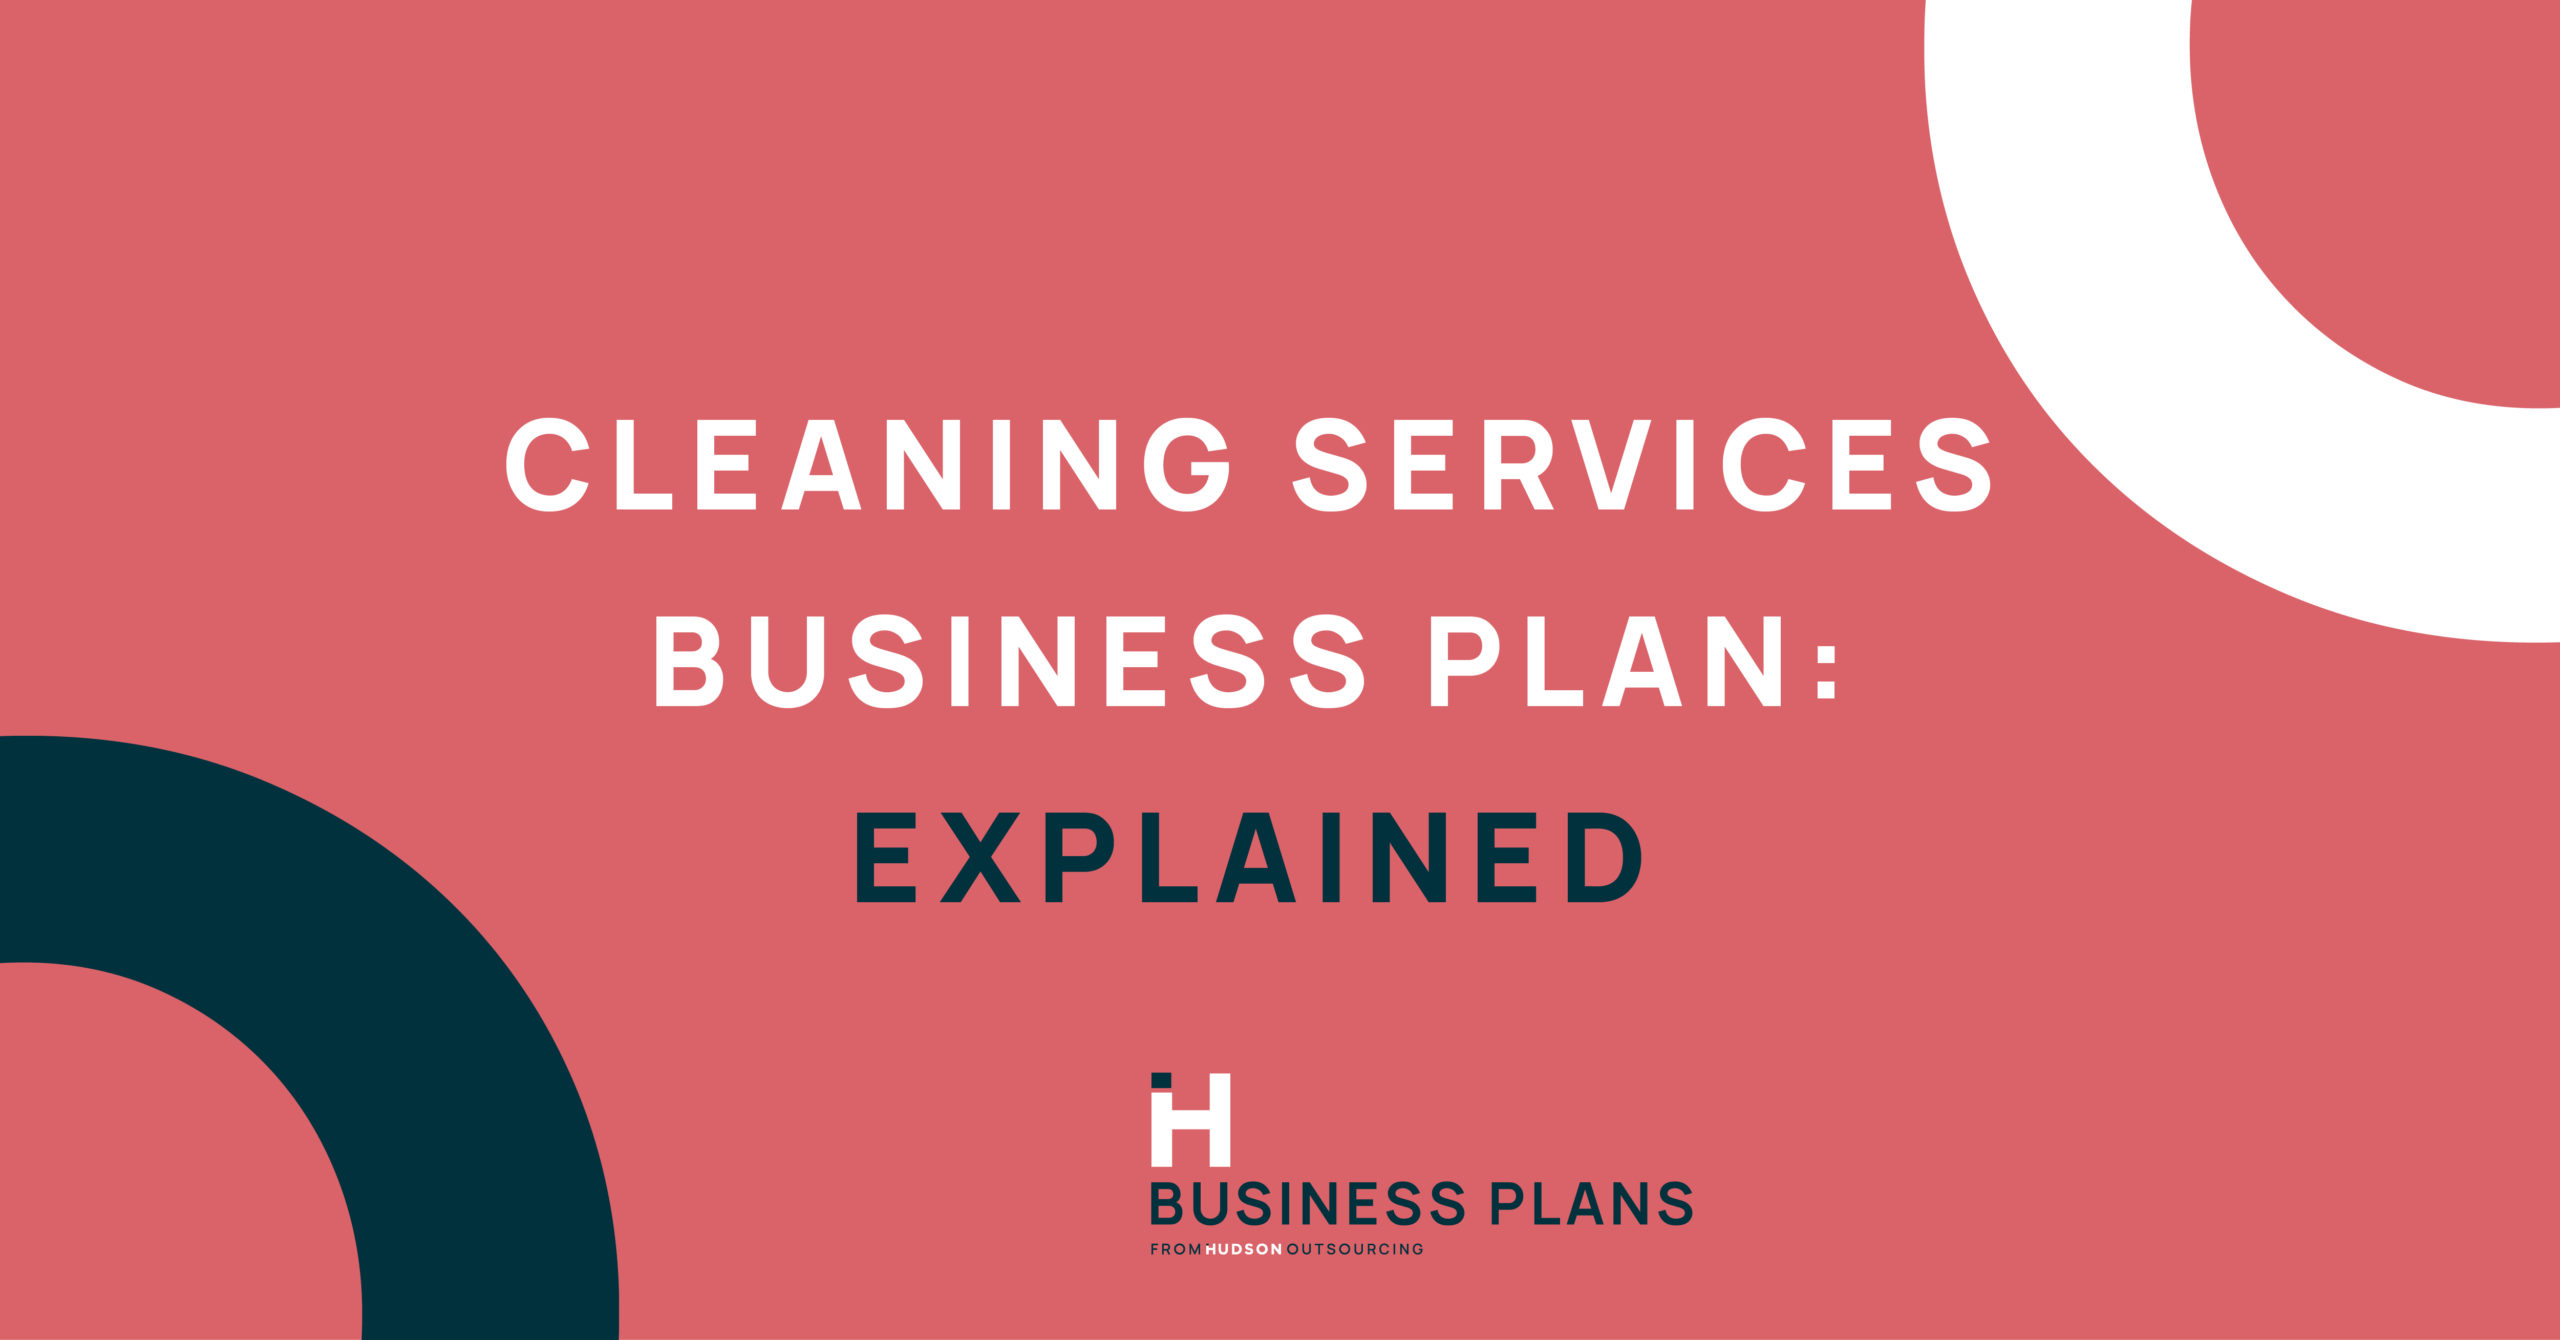 Cleaning Services Business Plan: Explained